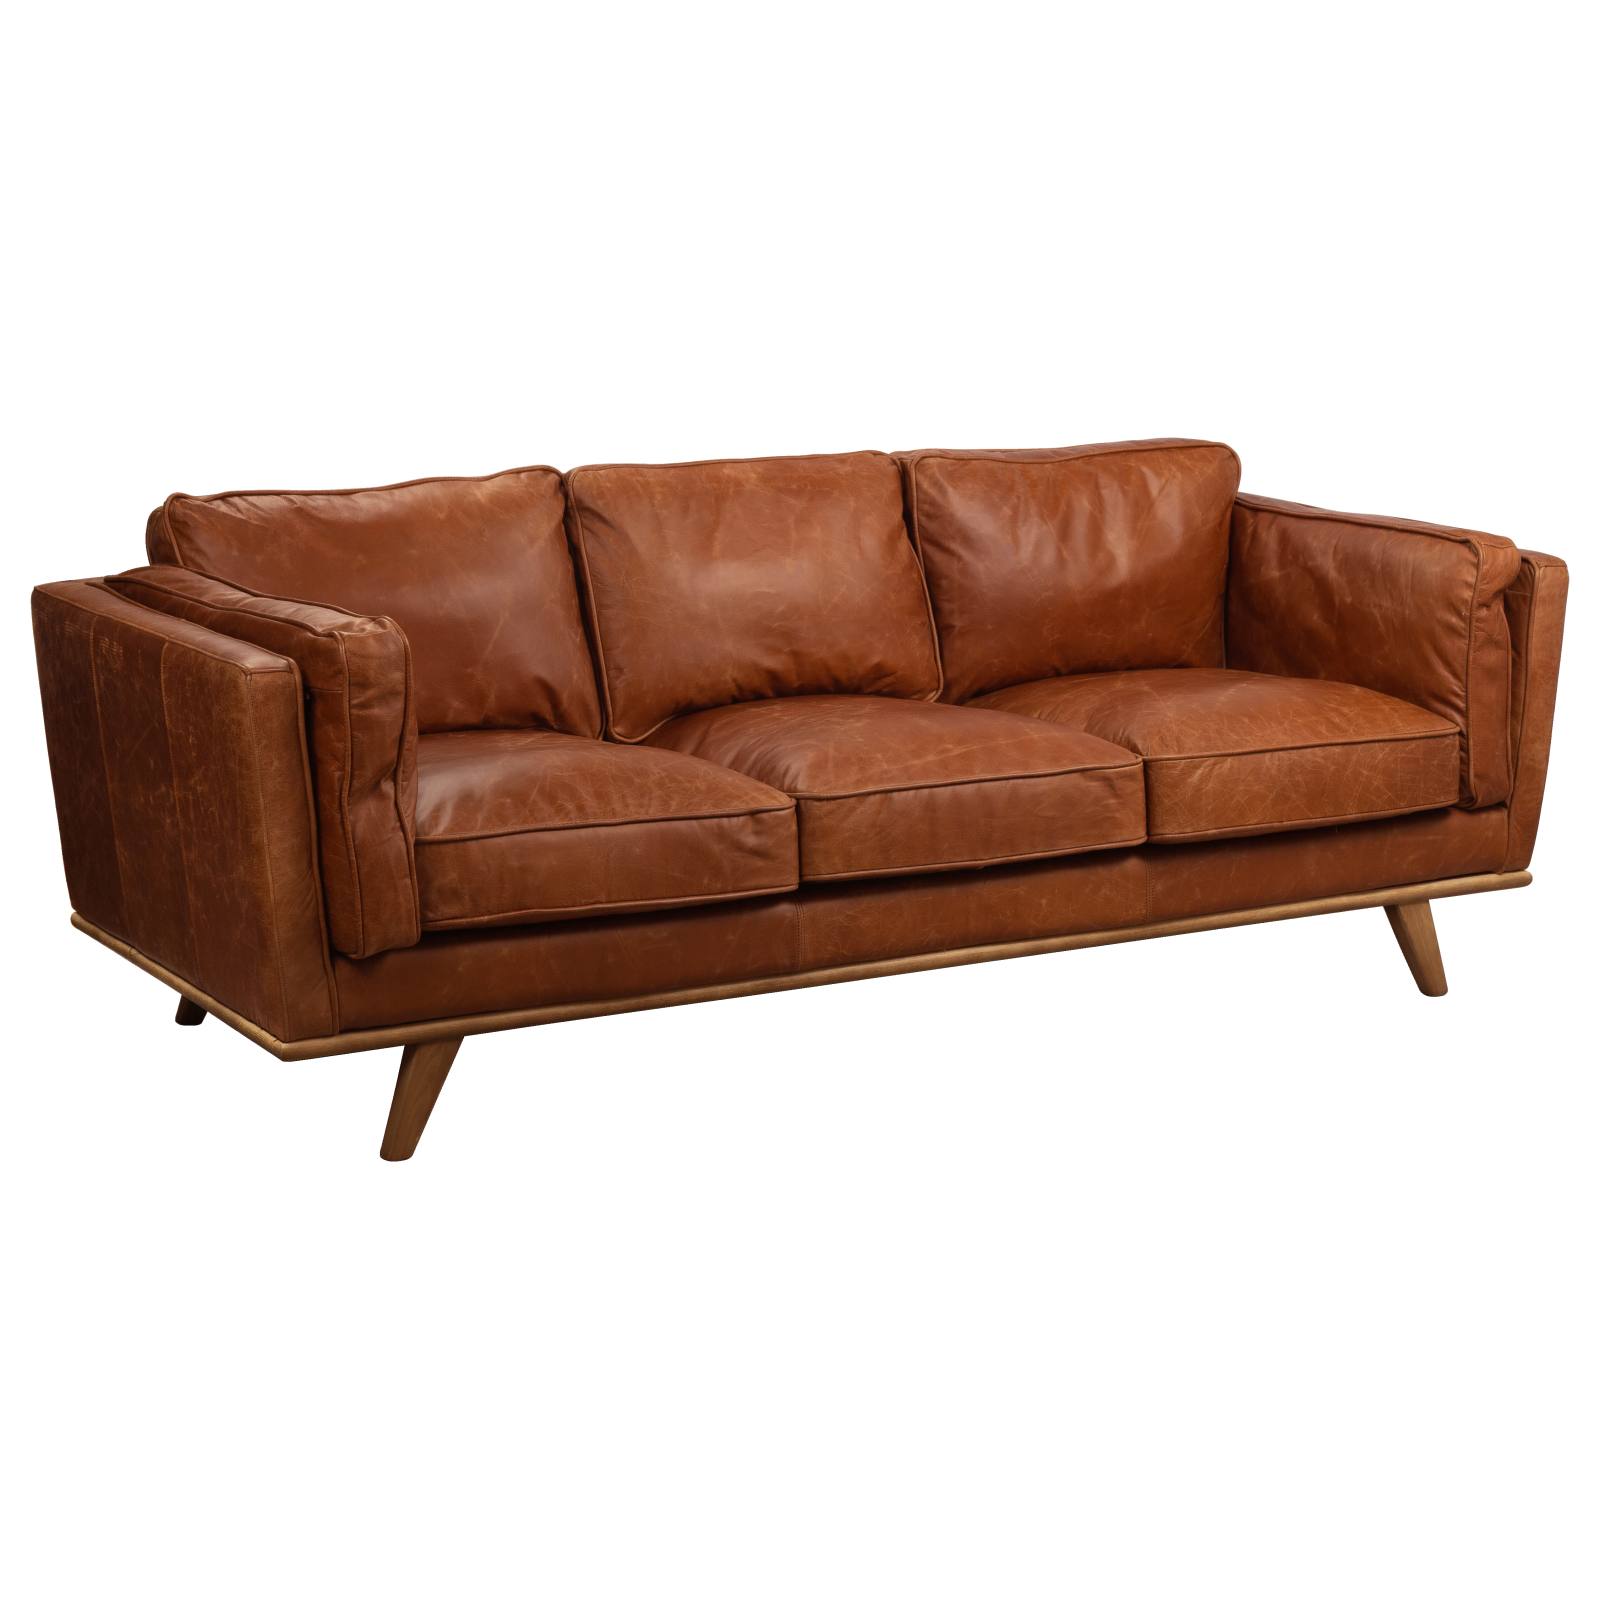 Laa 3 Seater Leather Sofa Vintage, Soft Leather Couches